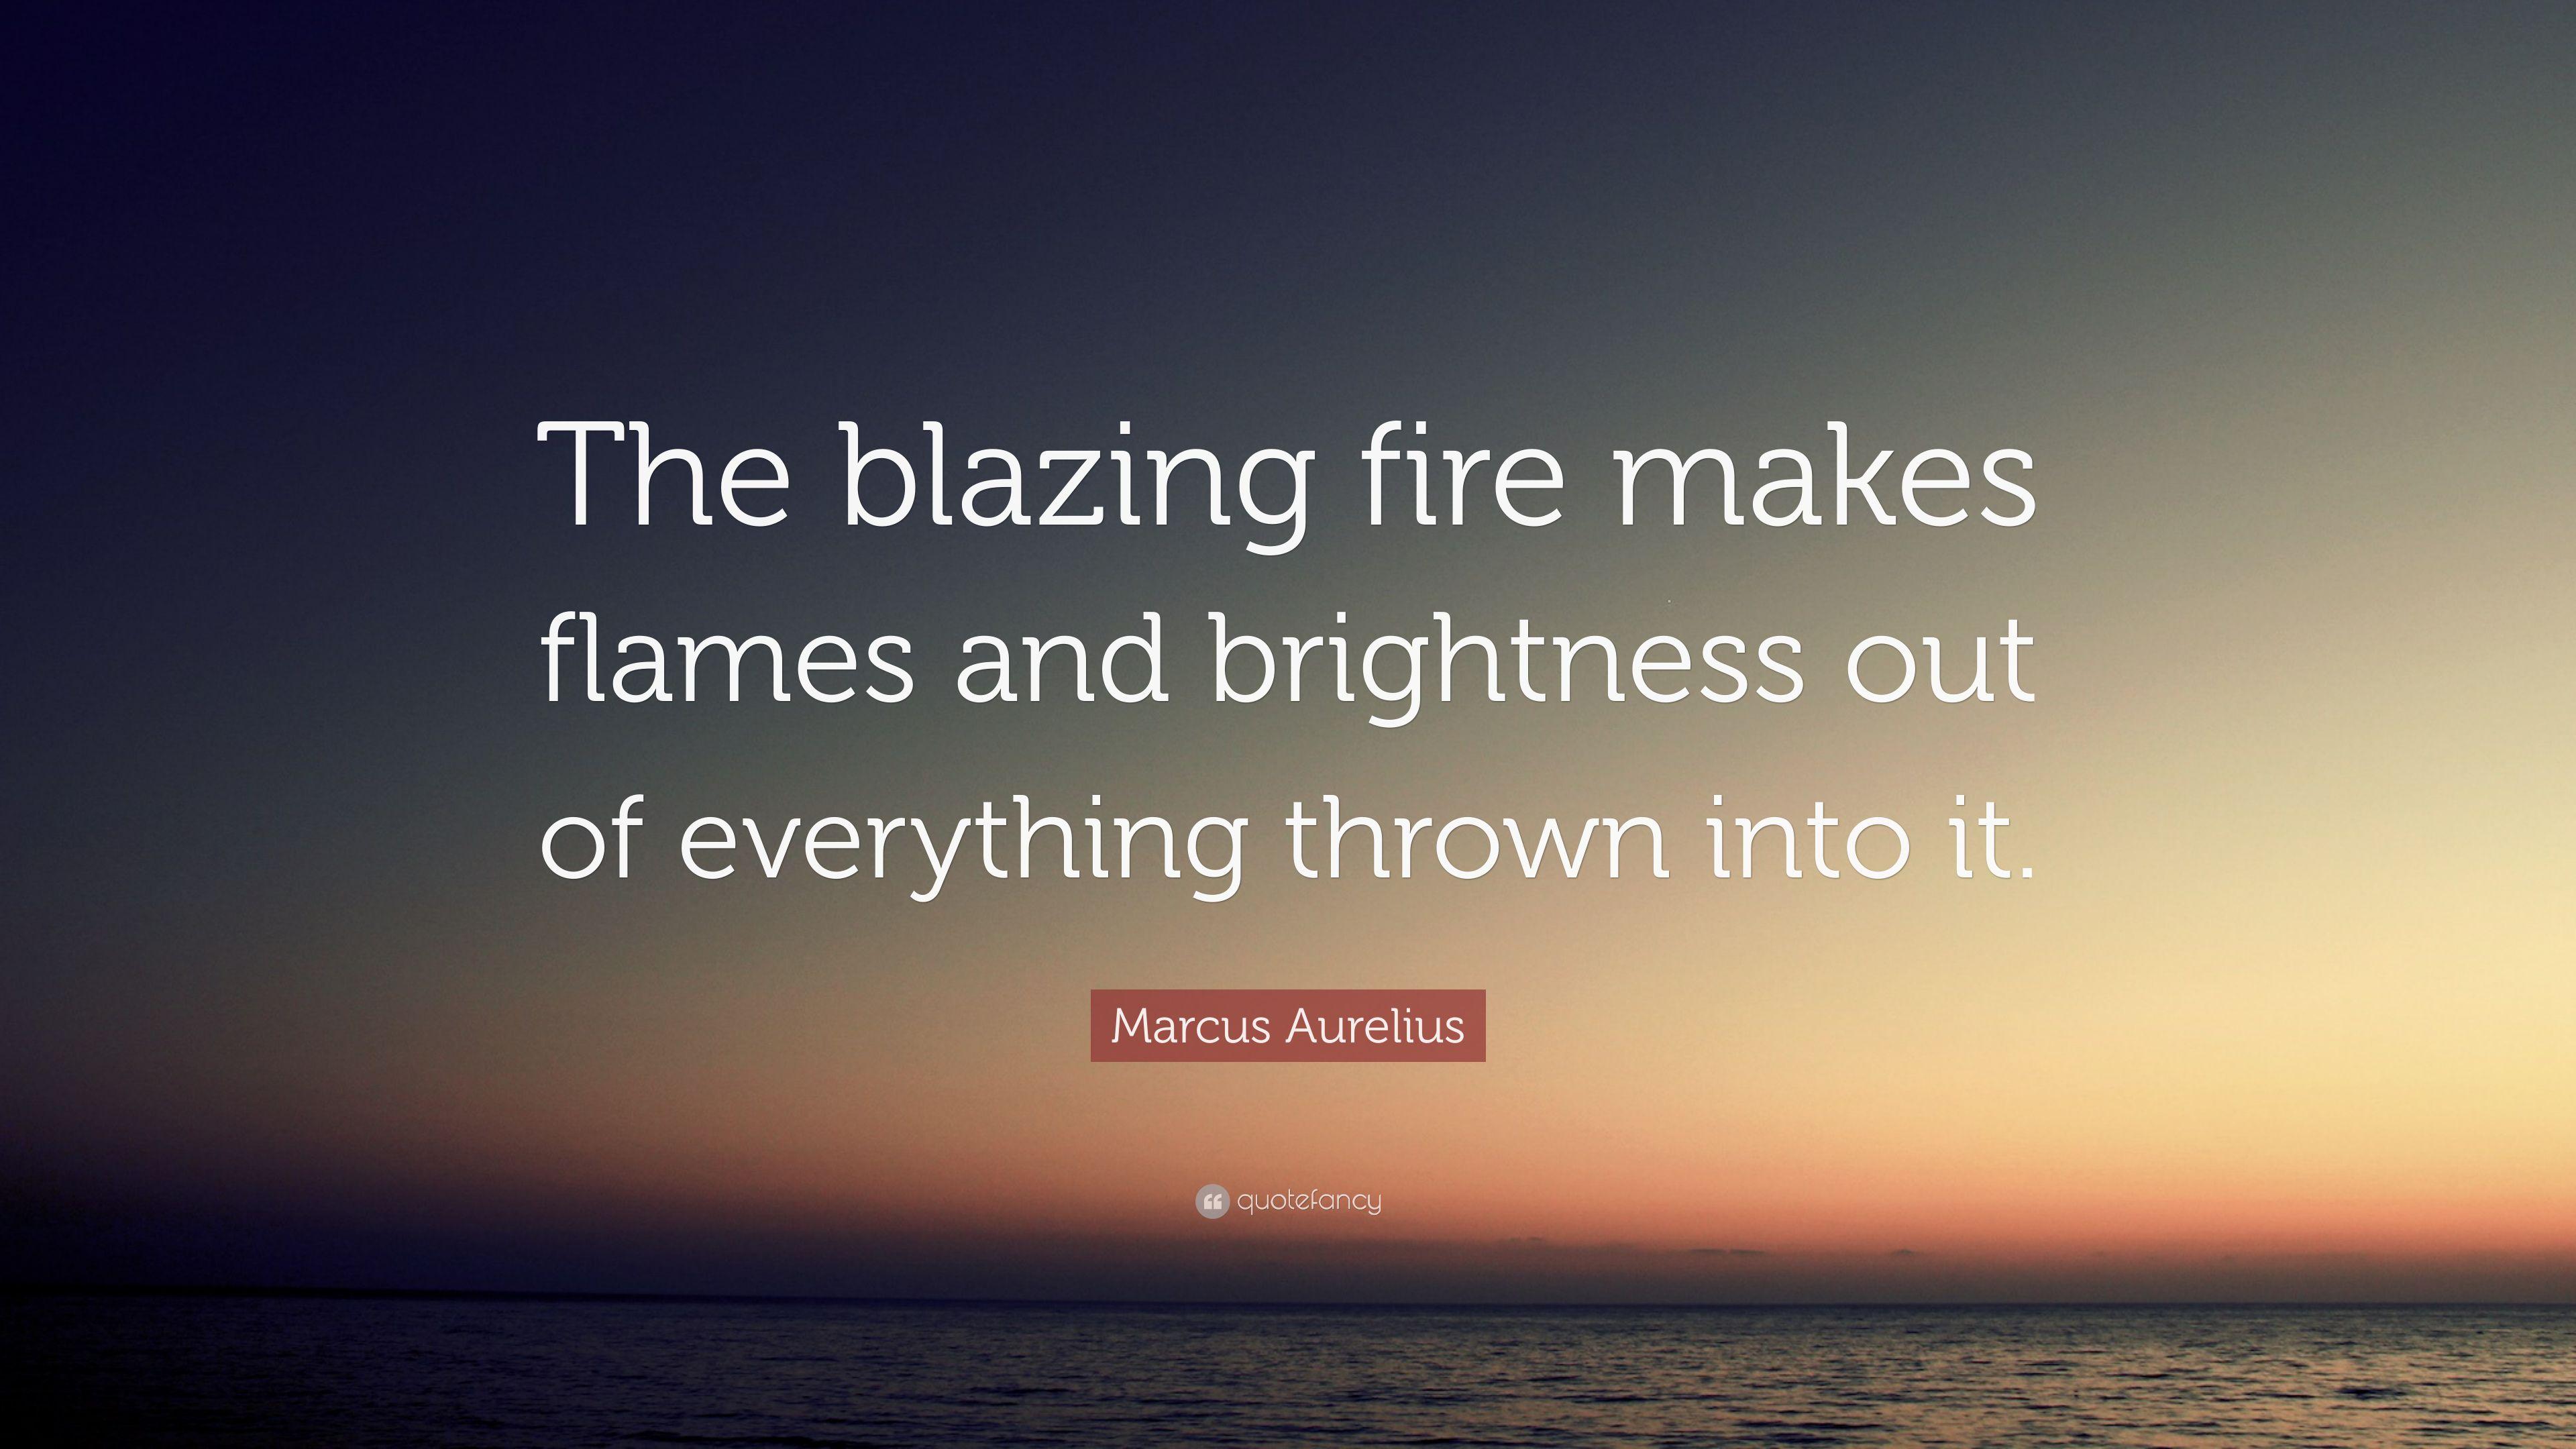 Blazing Flame Logo - Marcus Aurelius Quote: “The blazing fire makes flames and brightness